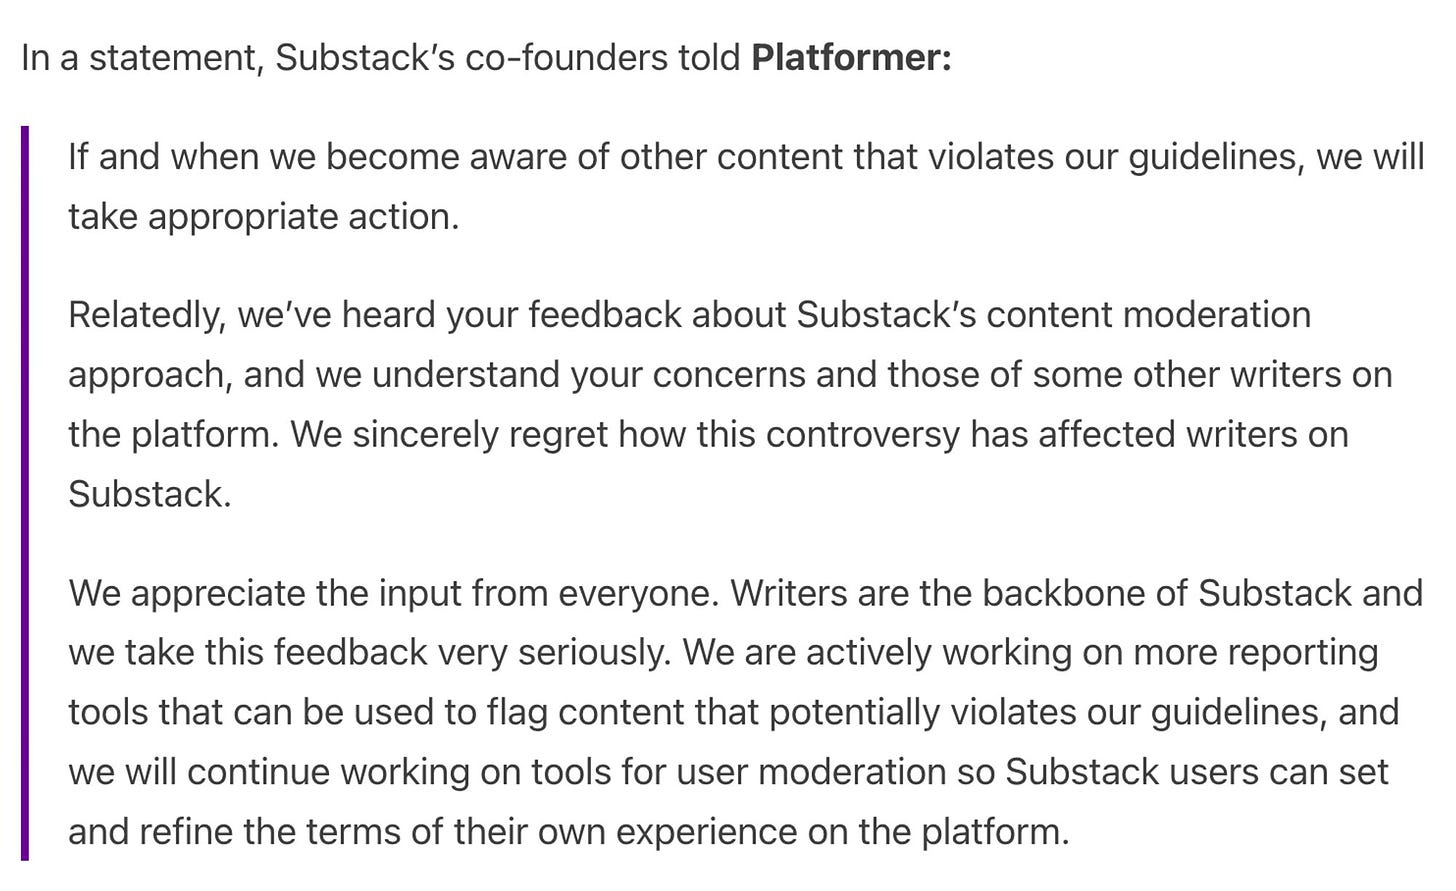 In a statement, Substack’s co-founders told Platformer:  If and when we become aware of other content that violates our guidelines, we will take appropriate action.   Relatedly, we’ve heard your feedback about Substack’s content moderation approach, and we understand your concerns and those of some other writers on the platform. We sincerely regret how this controversy has affected writers on Substack.   We appreciate the input from everyone. Writers are the backbone of Substack and we take this feedback very seriously. We are actively working on more reporting tools that can be used to flag content that potentially violates our guidelines, and we will continue working on tools for user moderation so Substack users can set and refine the terms of their own experience on the platform.